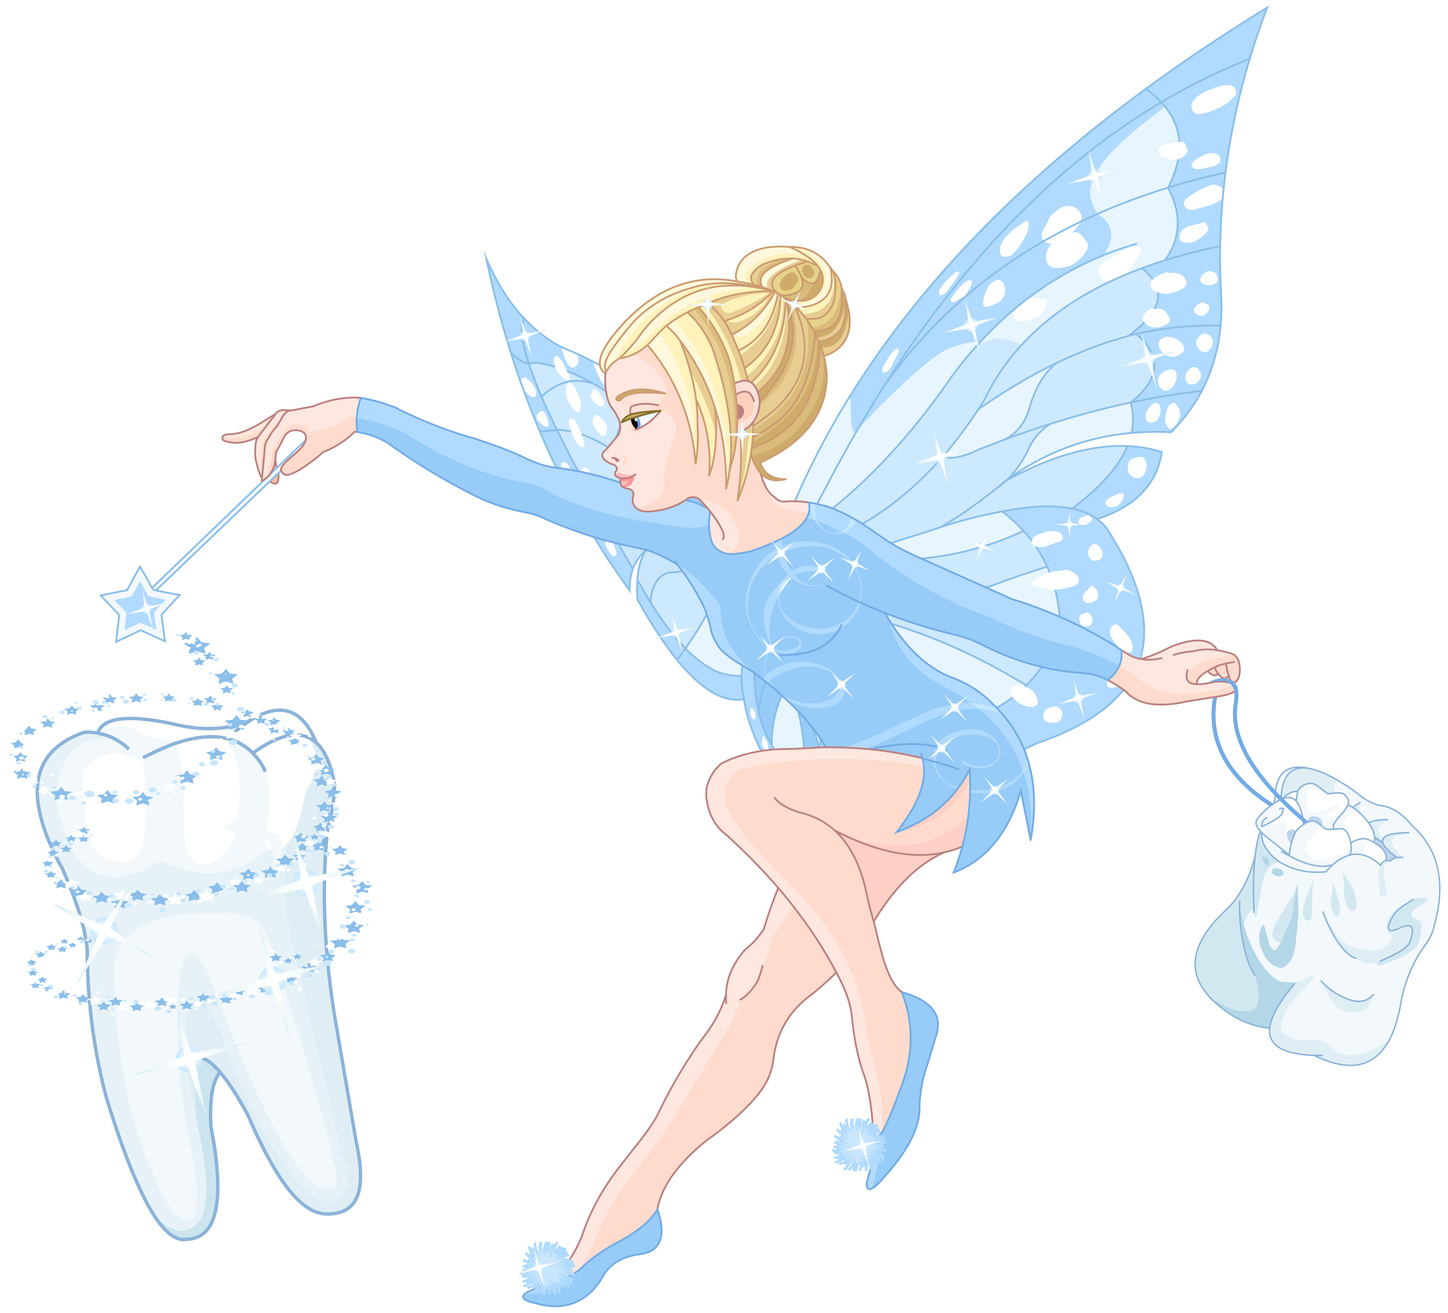 tooth fairy images free